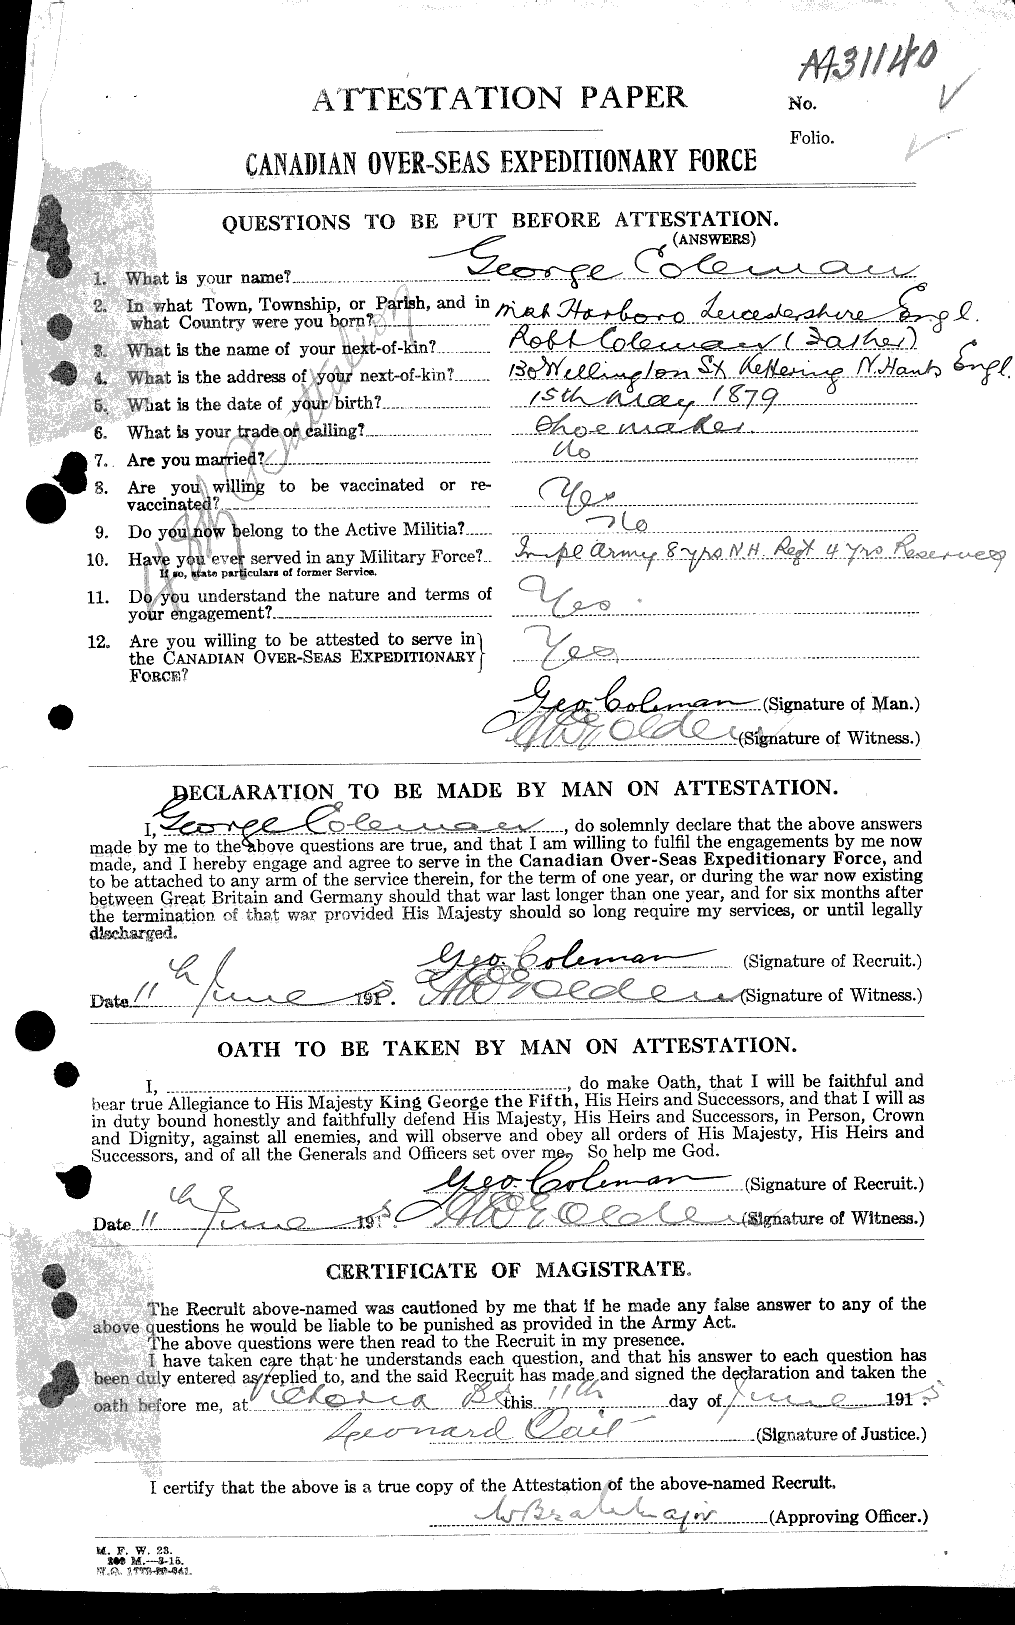 Personnel Records of the First World War - CEF 028147a